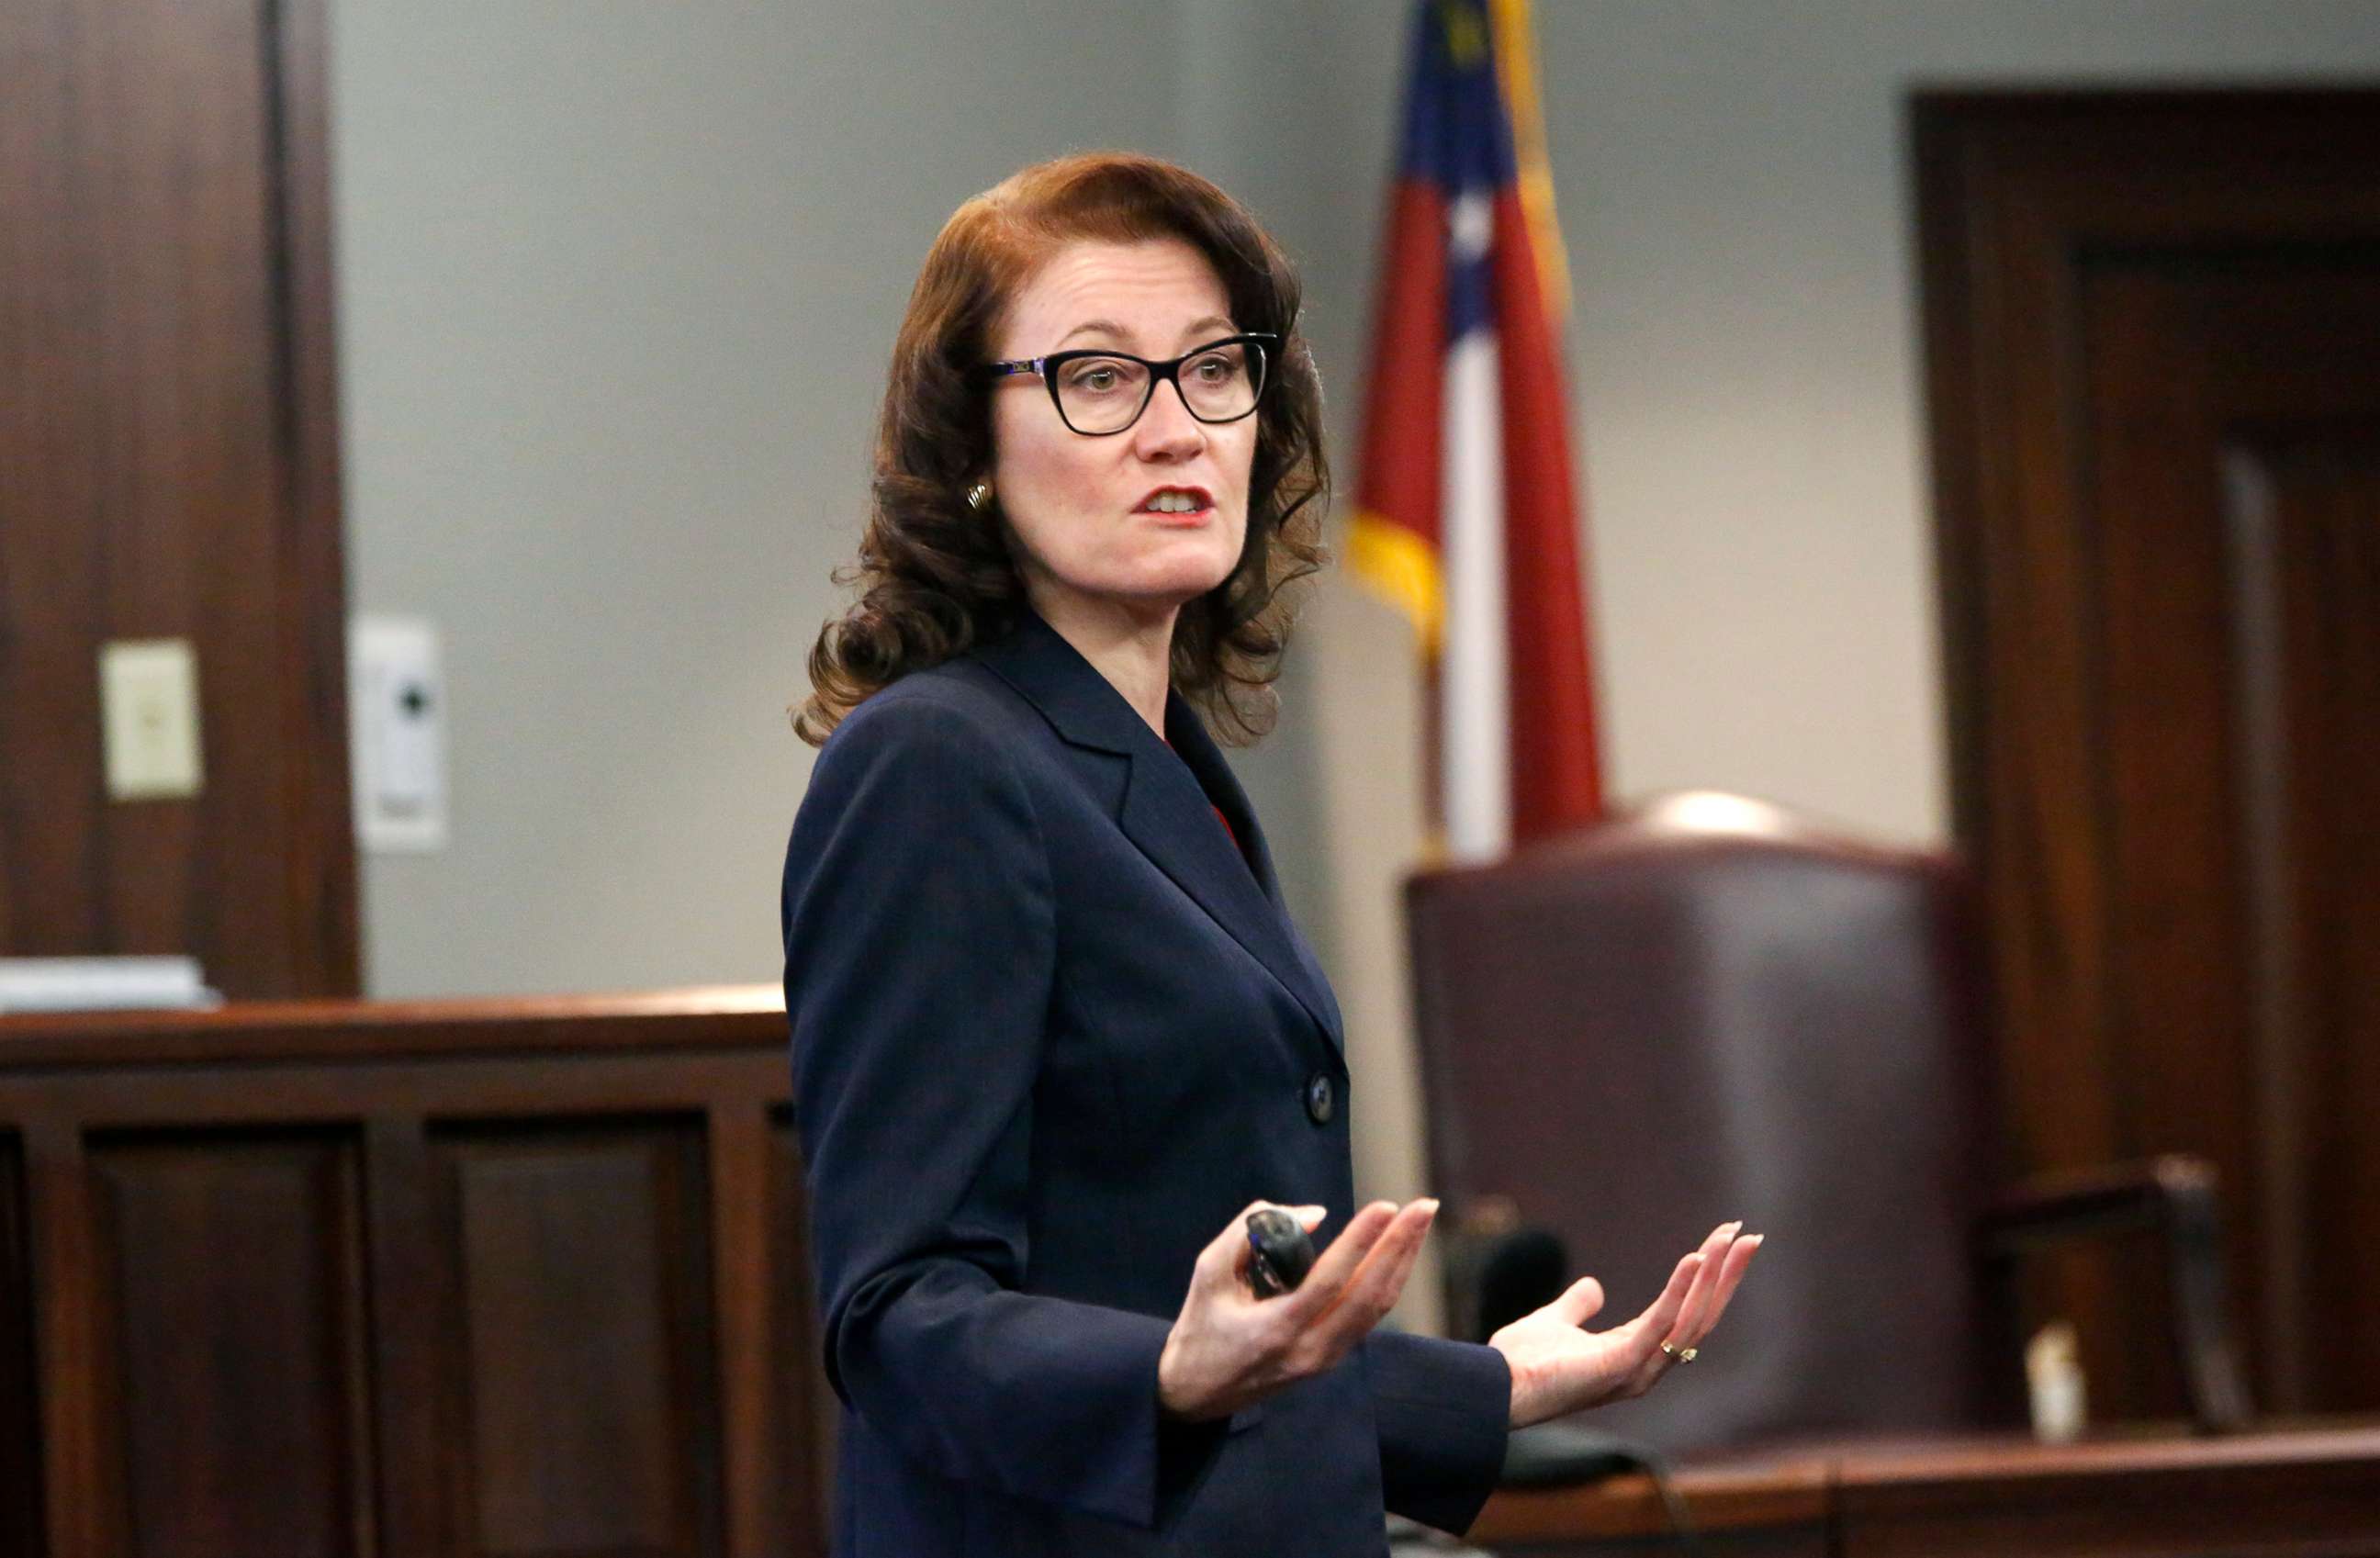 PHOTO: Prosecutor Linda Dunikoski makes her final rebuttal before the jury begins deliberations in the trial of William "Roddie" Bryan, Travis McMichael and Gregory McMichael, charged with the death of Ahmaud Arbery, Nov. 23, 2021 in Brunswick, Ga.